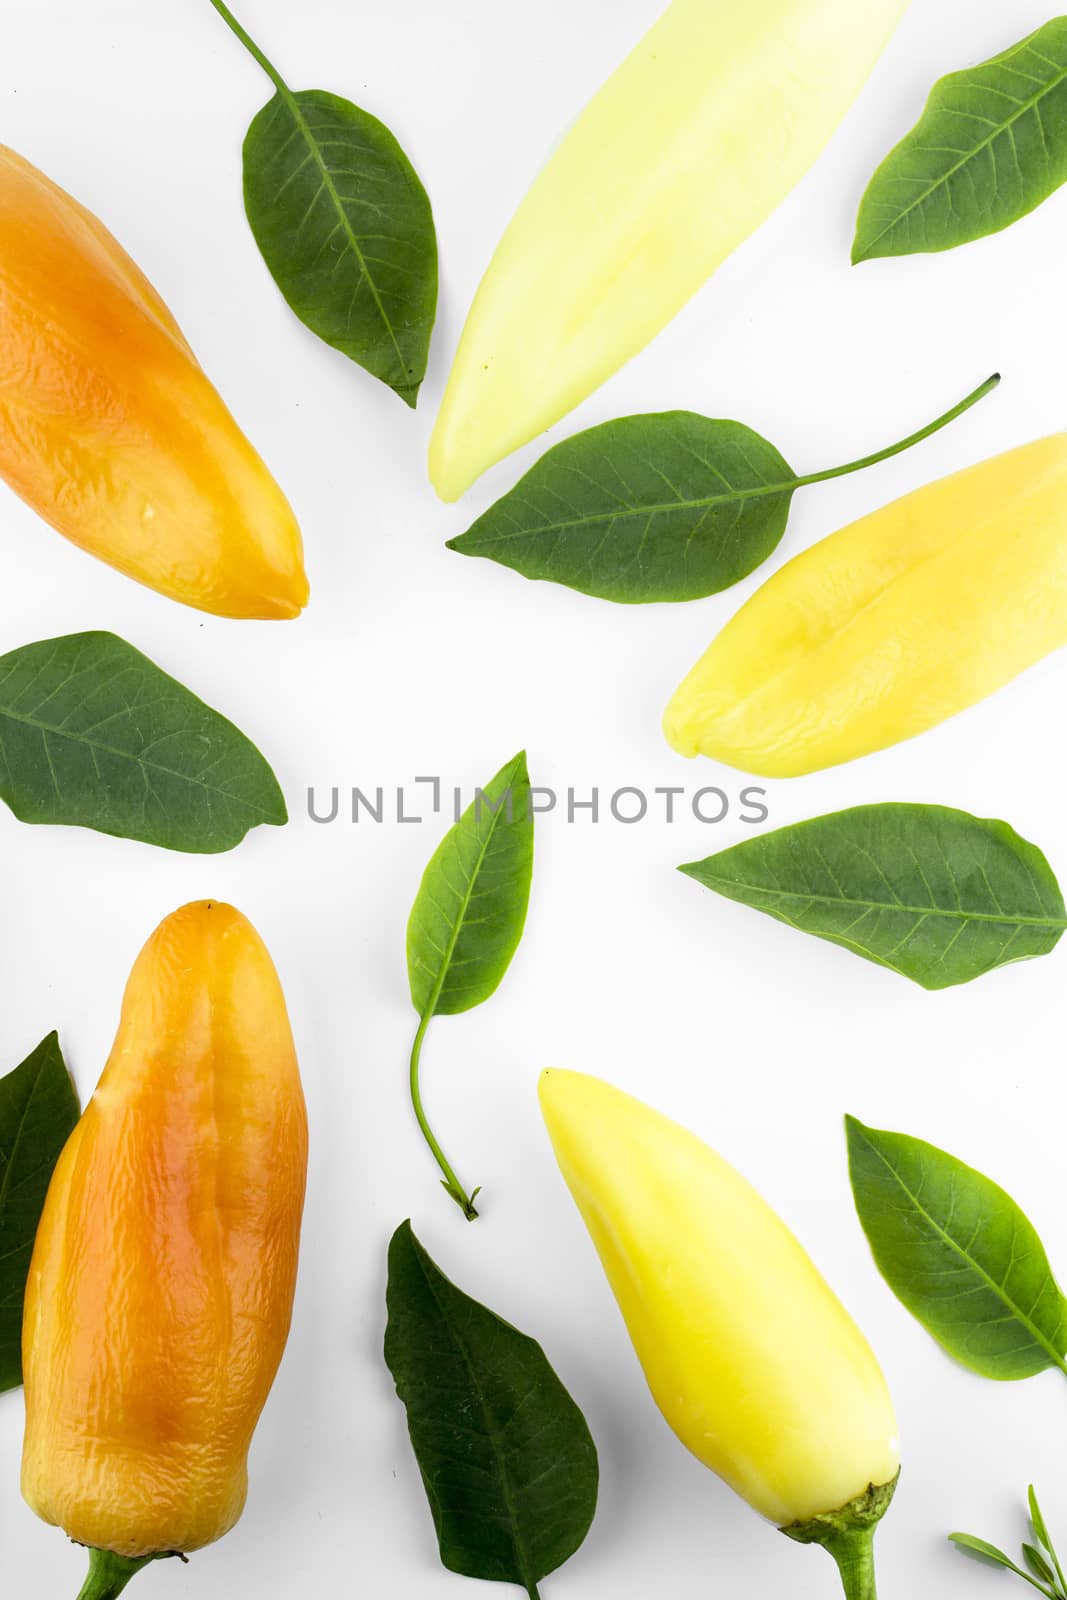 orange and yellow hot chili pepper with leaves on a white background